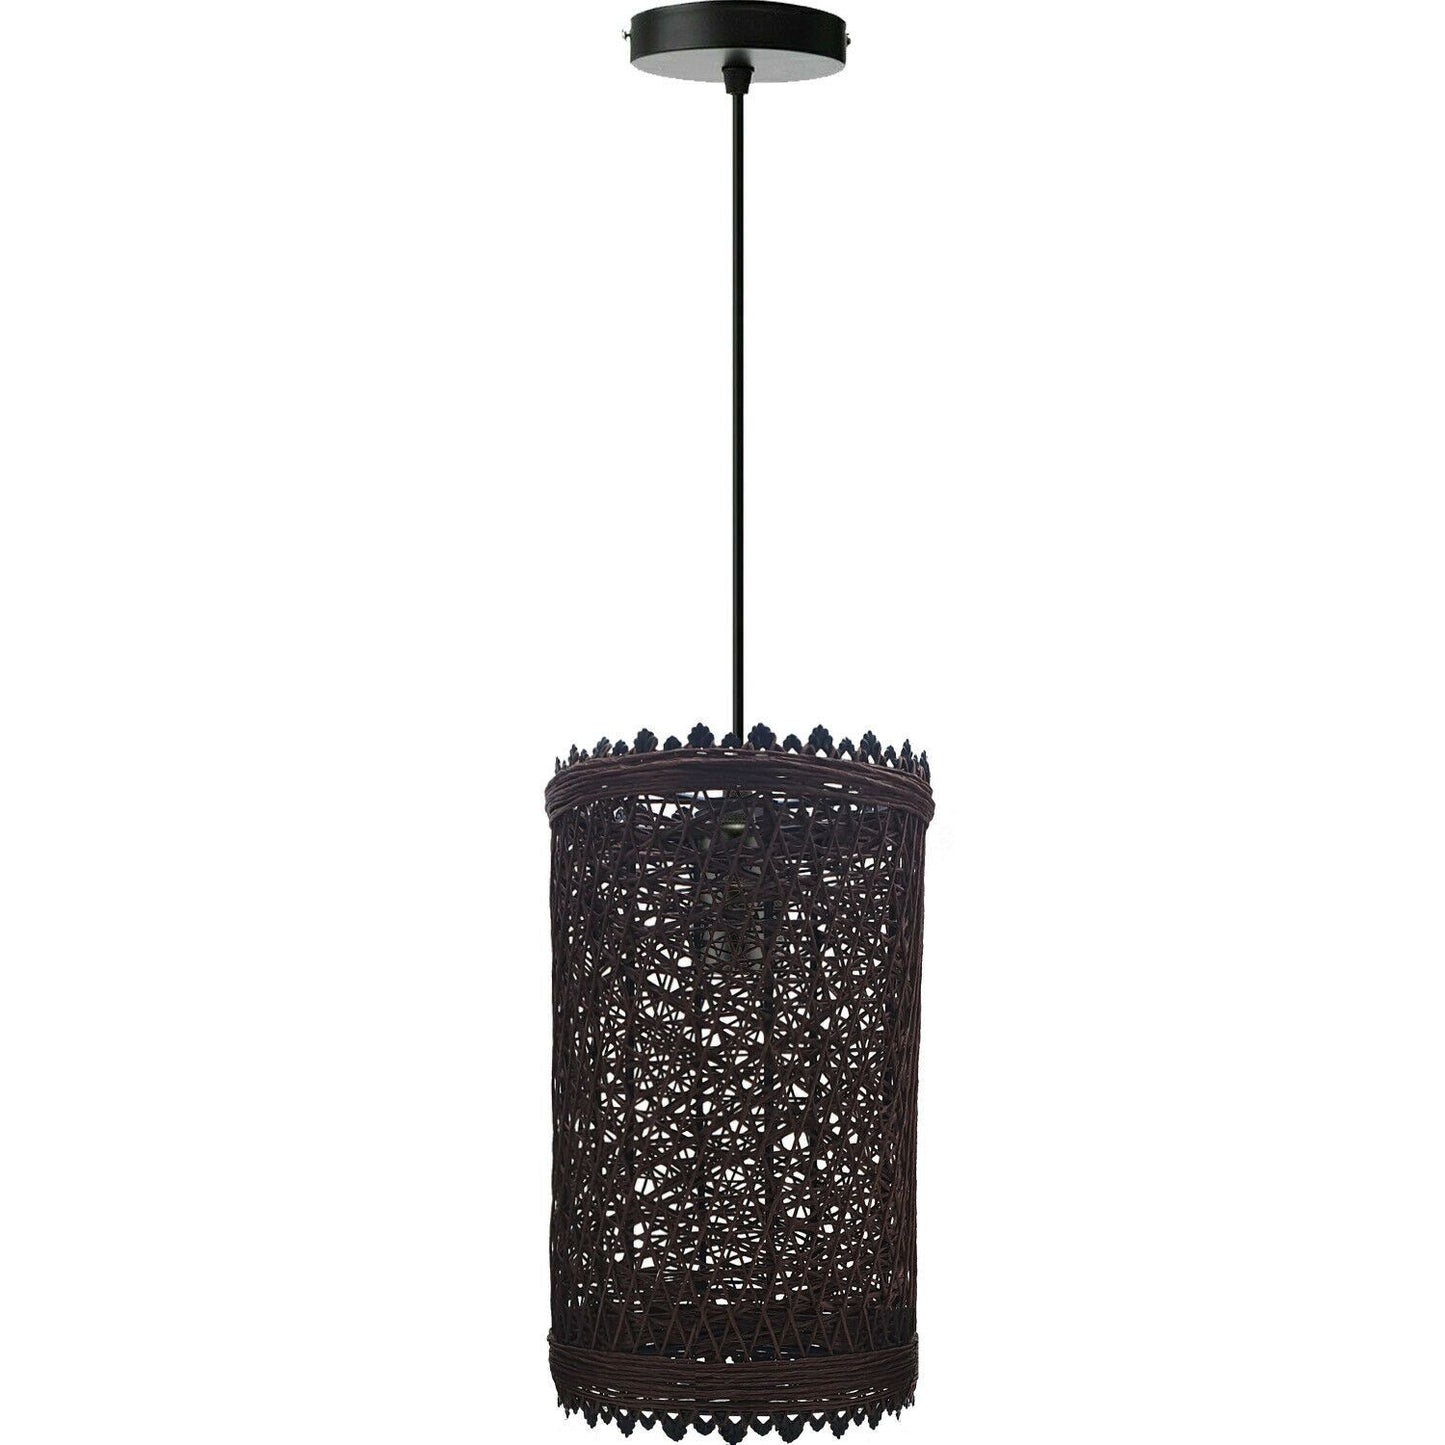 Brown Industrial Rope Rattan Woven Basket Shade Pendant Lights